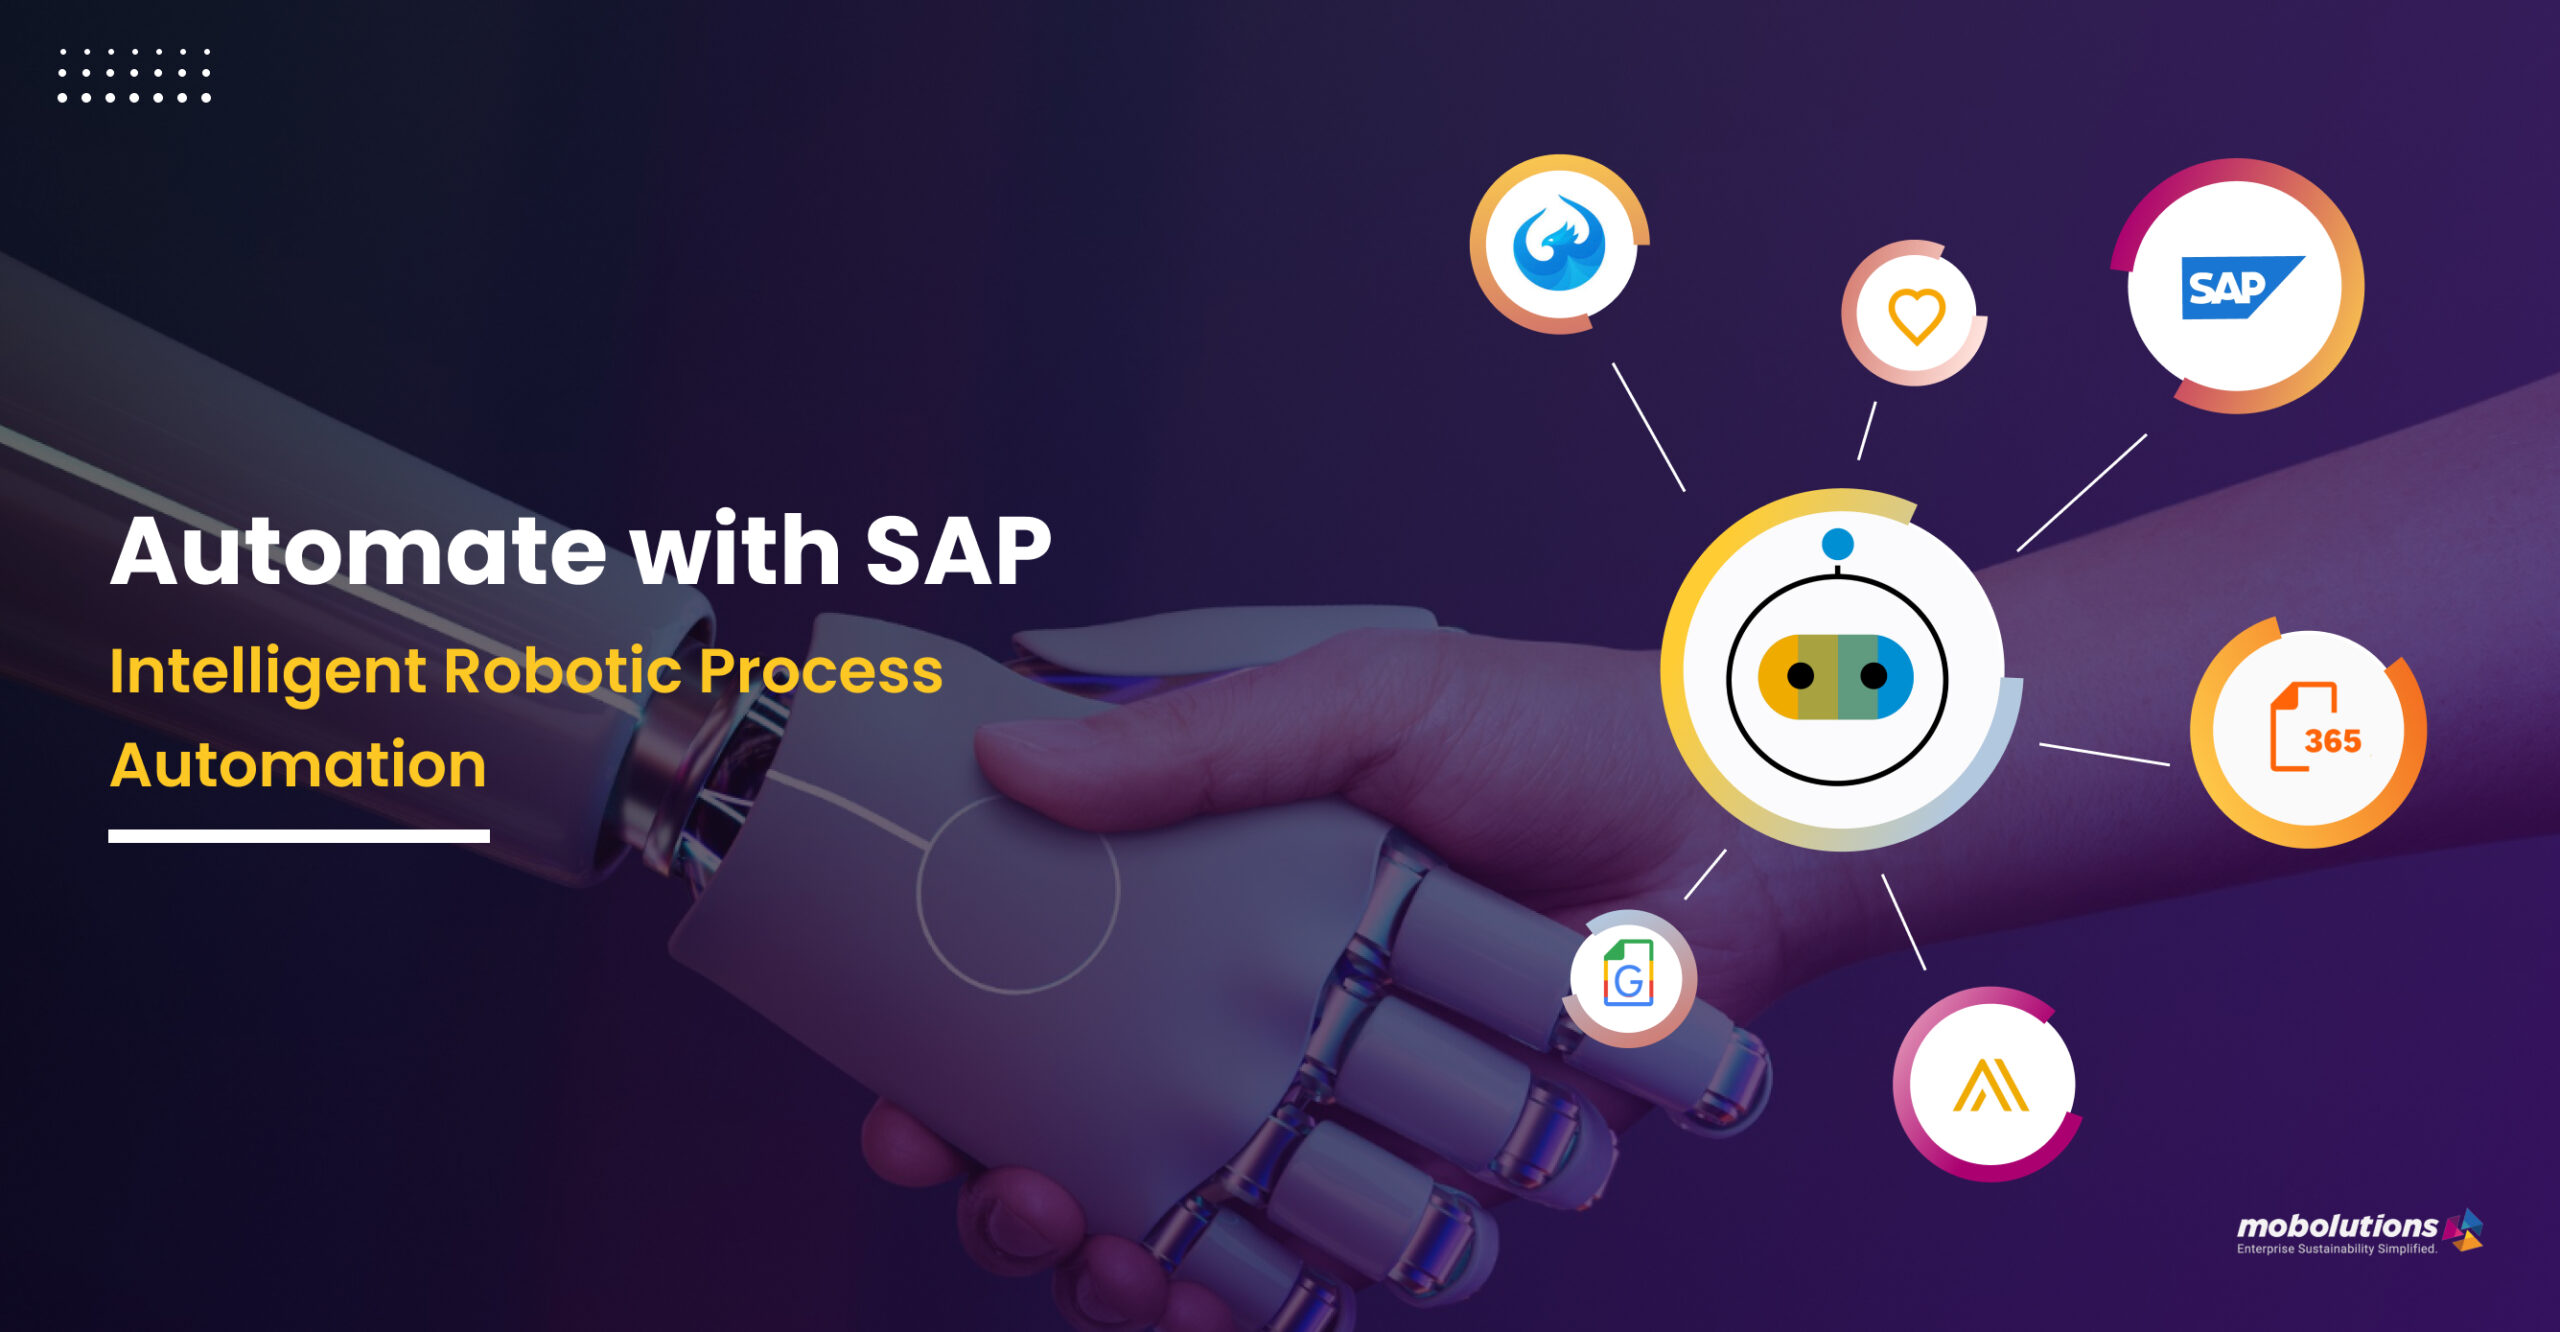 Automation with SAP Robotic Process